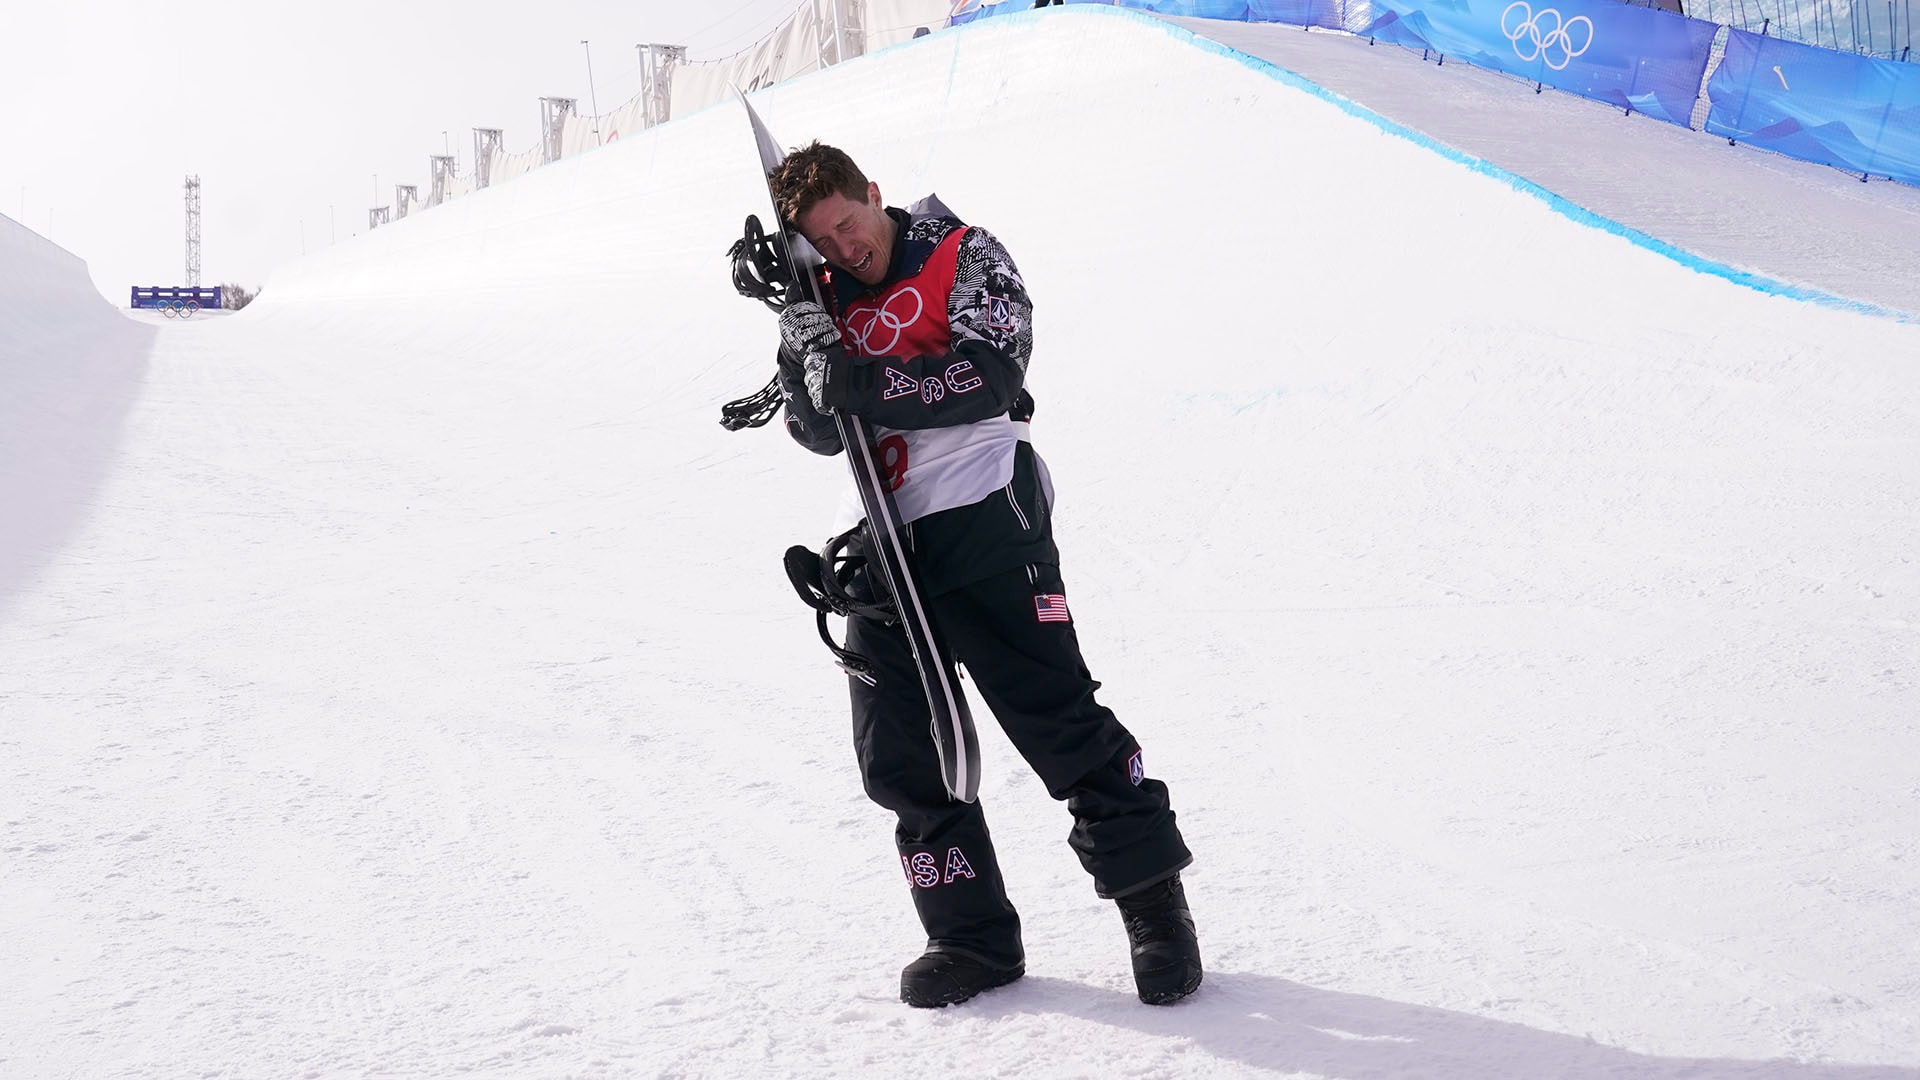 After final snowboard competition, what will Shaun White do next?